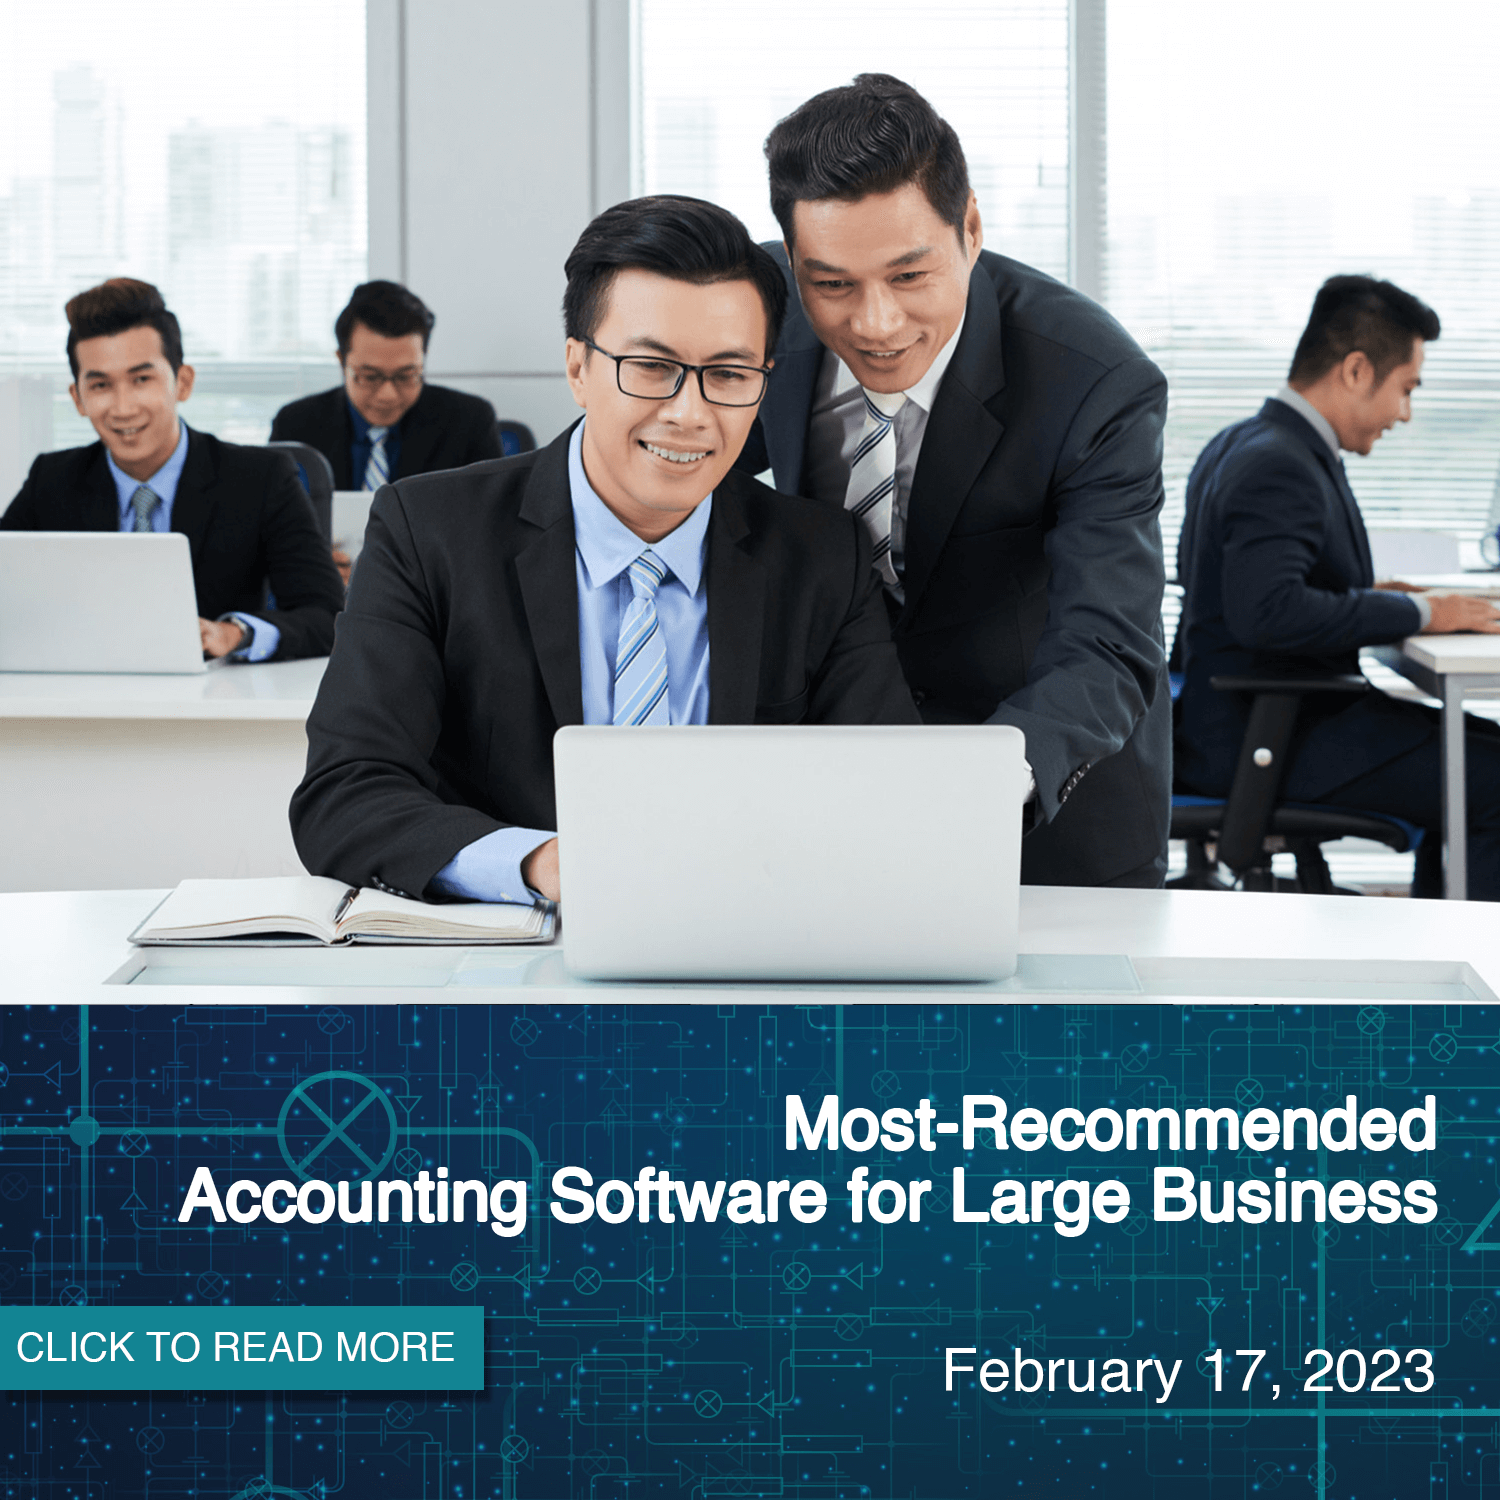 Most-Recommended Accounting Software for Large Business